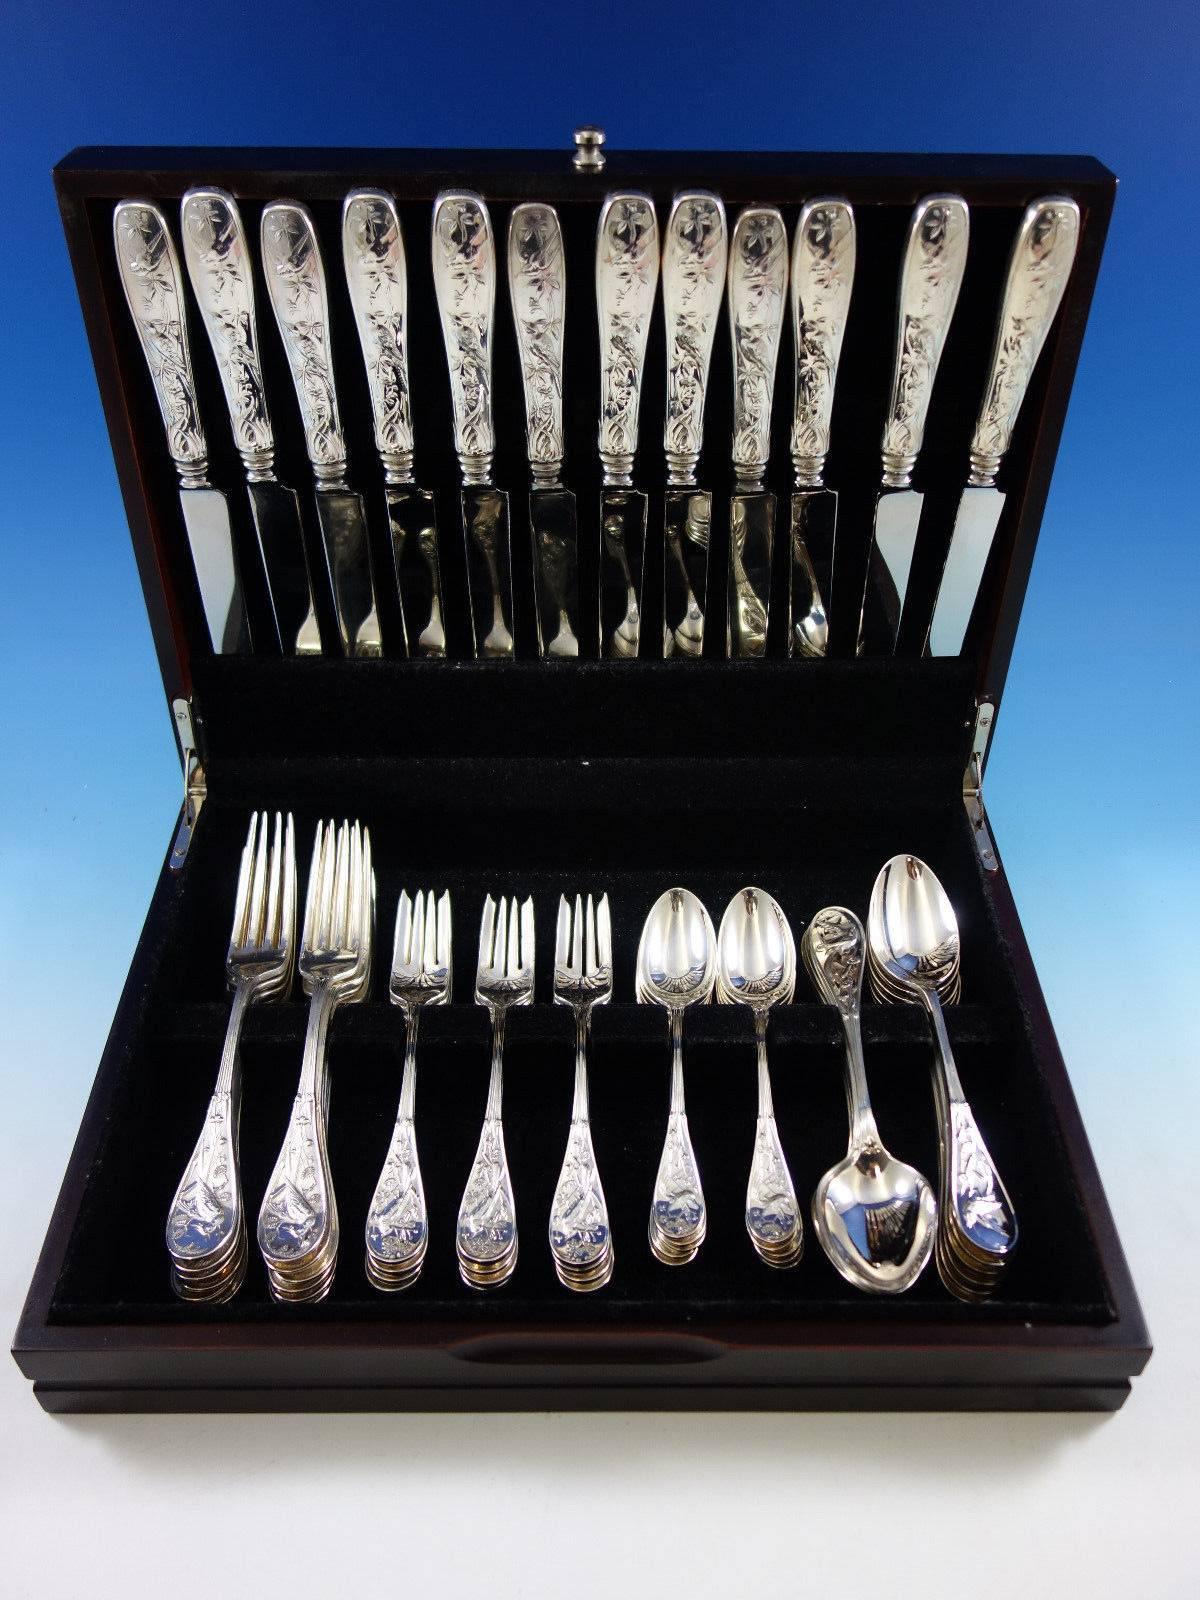 This estate set is circa 1960s, the pattern detailing is far superior compared to the pieces made today from worn out dies. Dinner Size Audubon by Tiffany & Co. sterling silver flatware set, 60 pieces. This set includes: 12 dinner size knives, 9